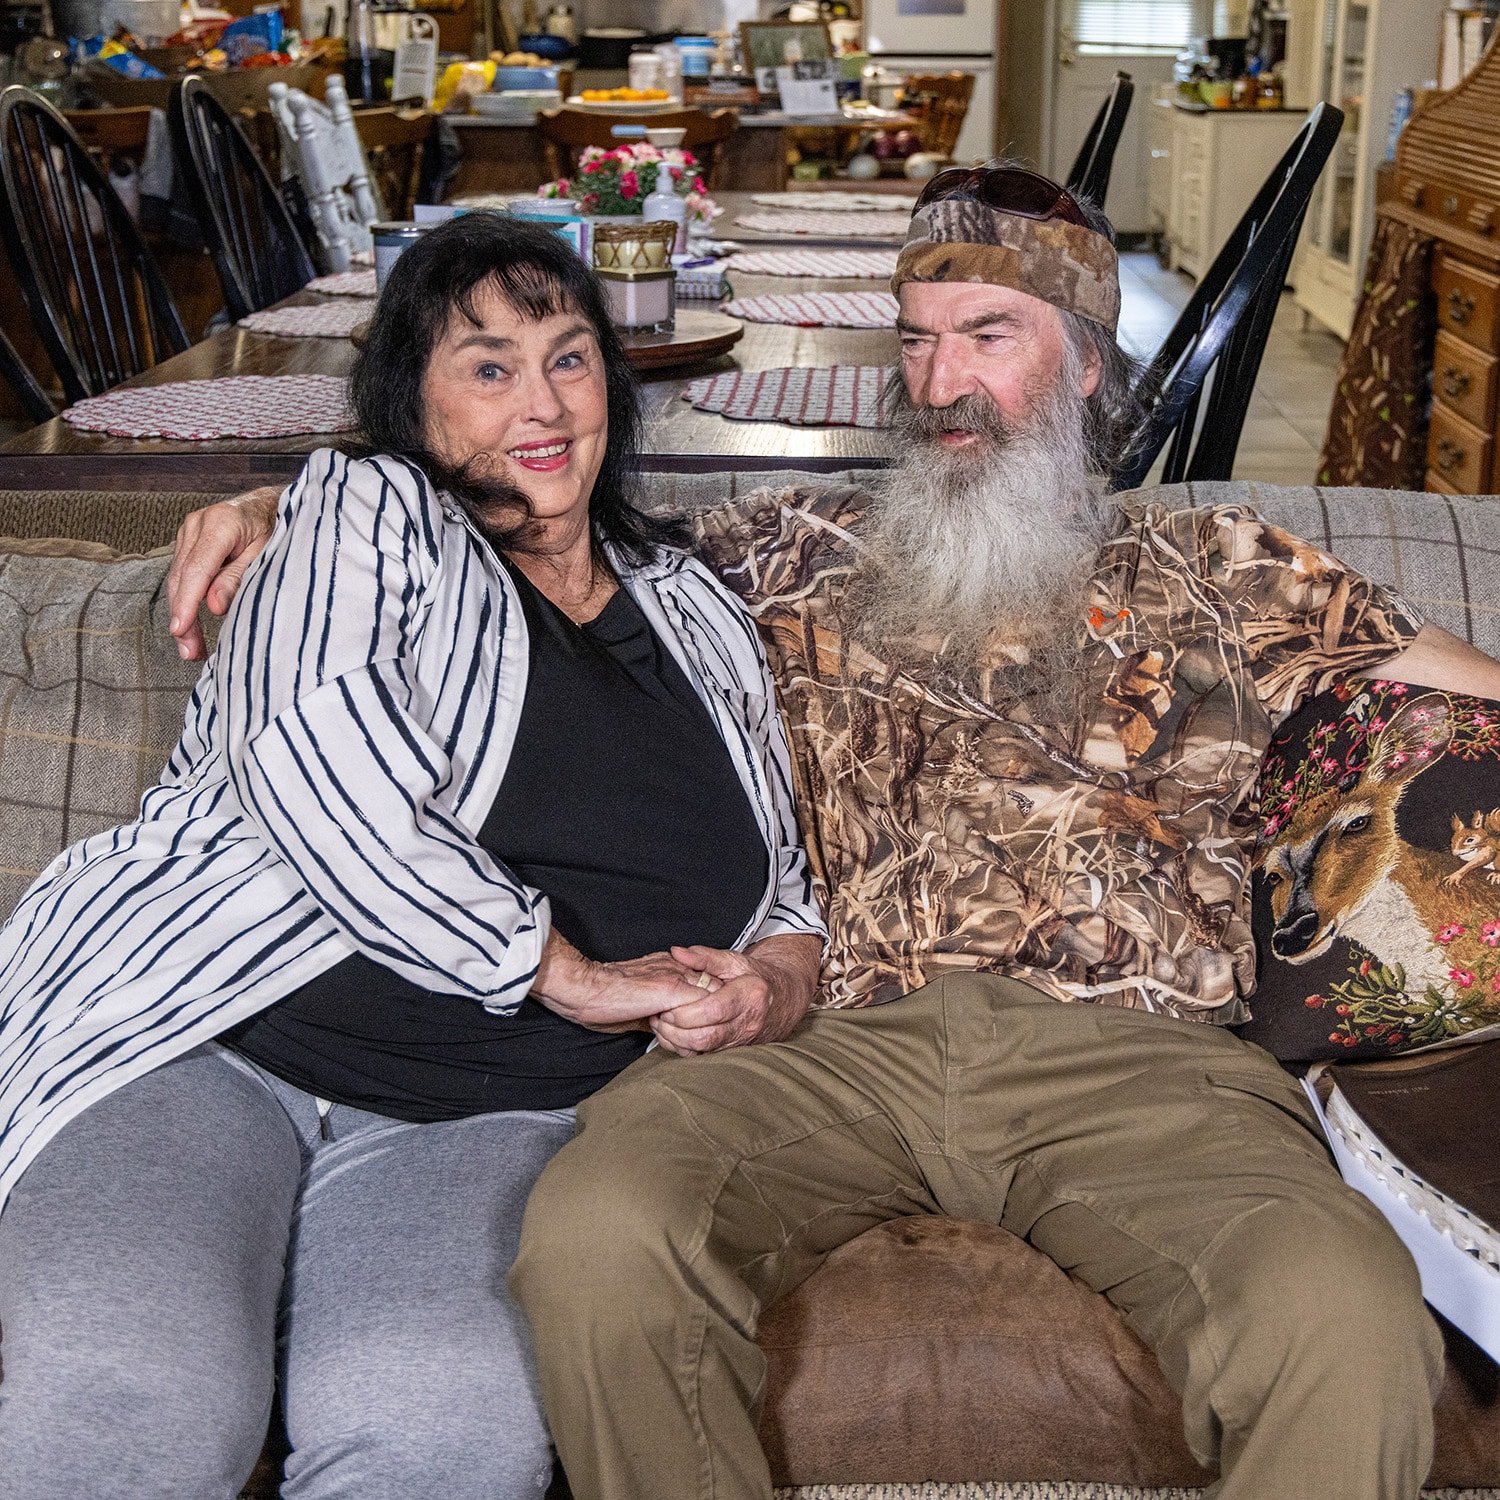 Phil Robertson shared his wife Miss Kay is in the hospital